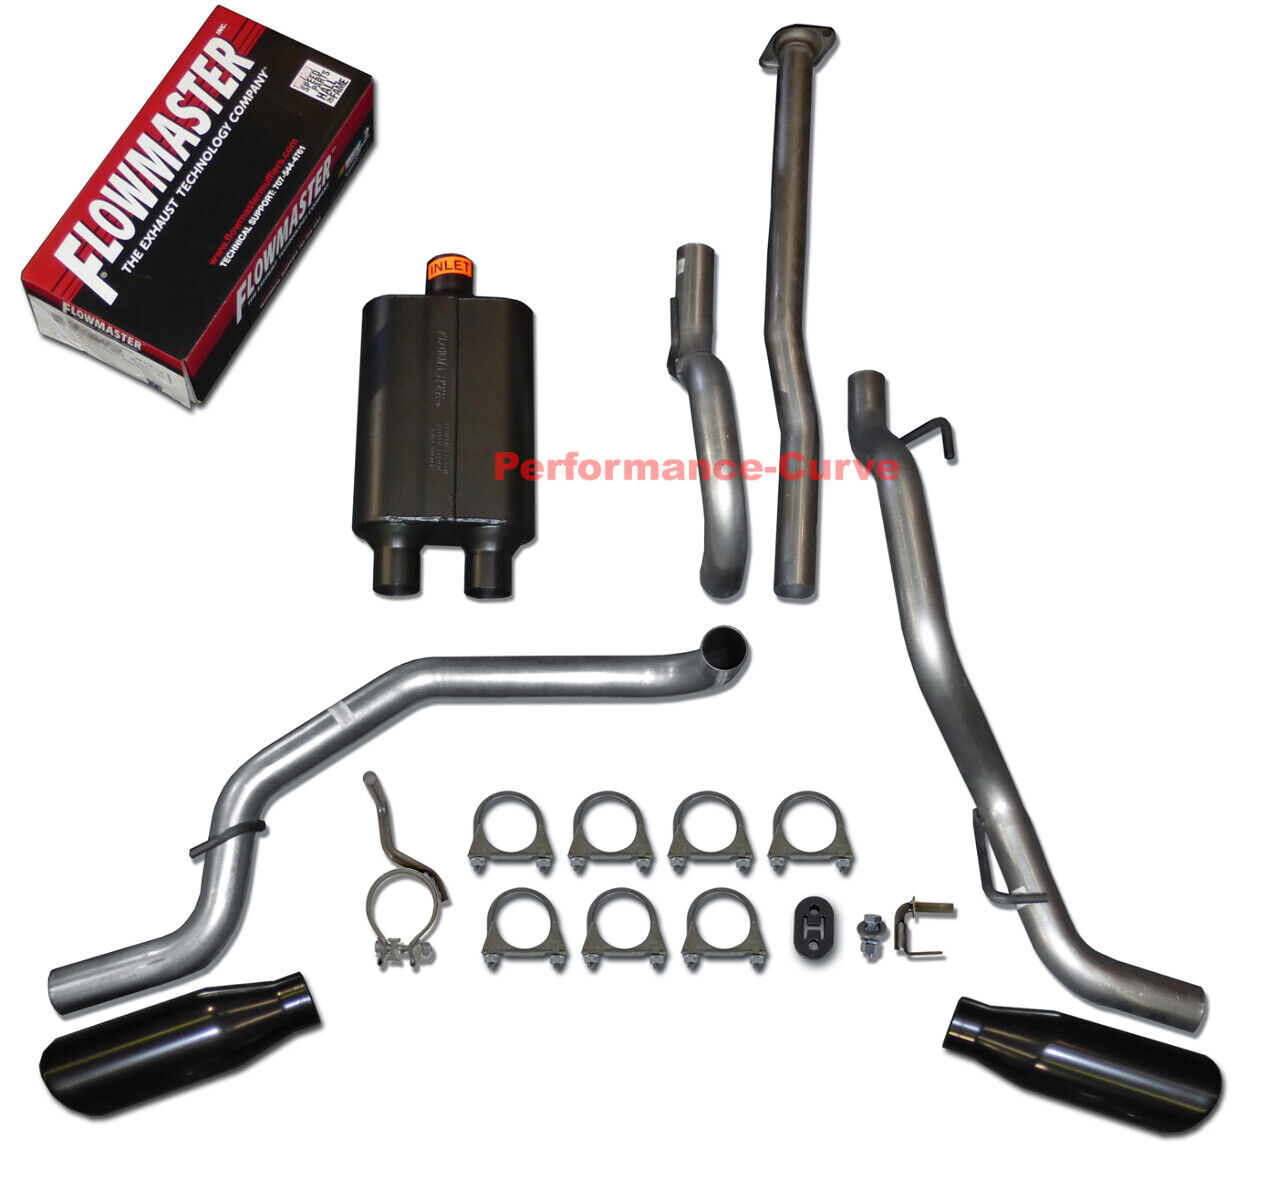 05-12 Toyota Tacoma 4.0 Catback Dual Exhaust Side Exit - Flowmaster Super 44